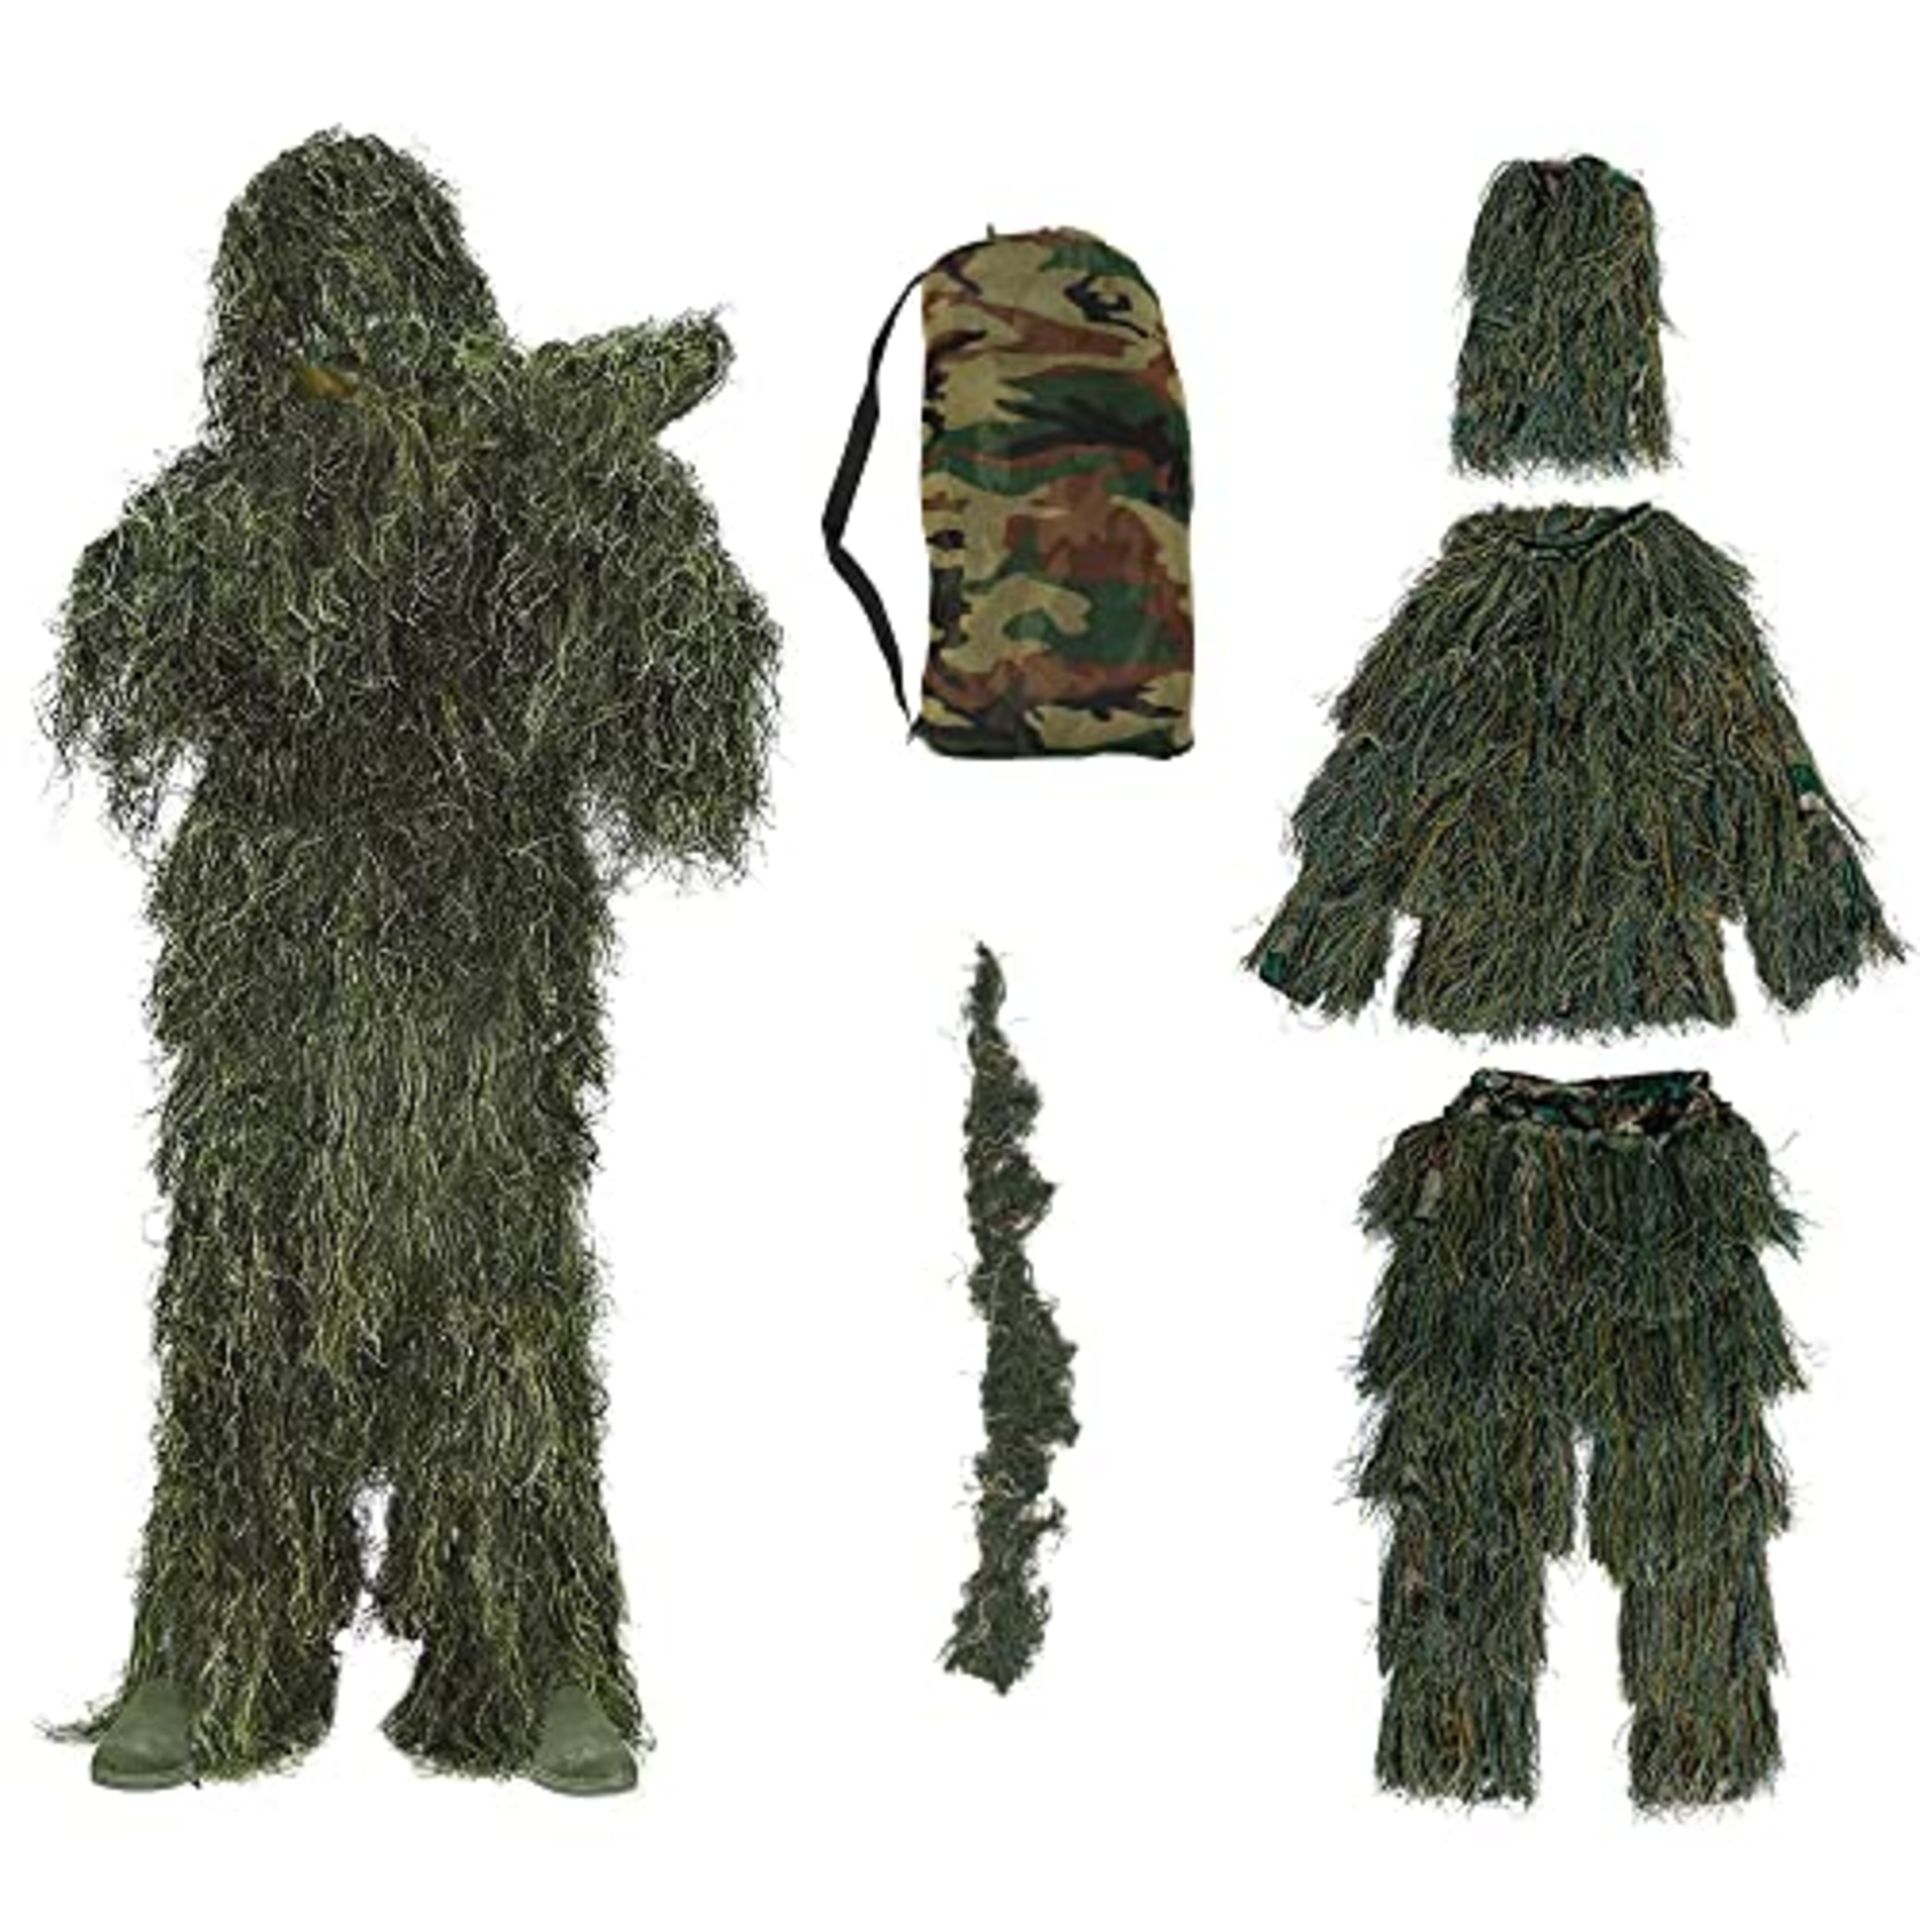 RRP £39.95 aleawol 5 in 1 Ghillie Suit Adult Airsoft